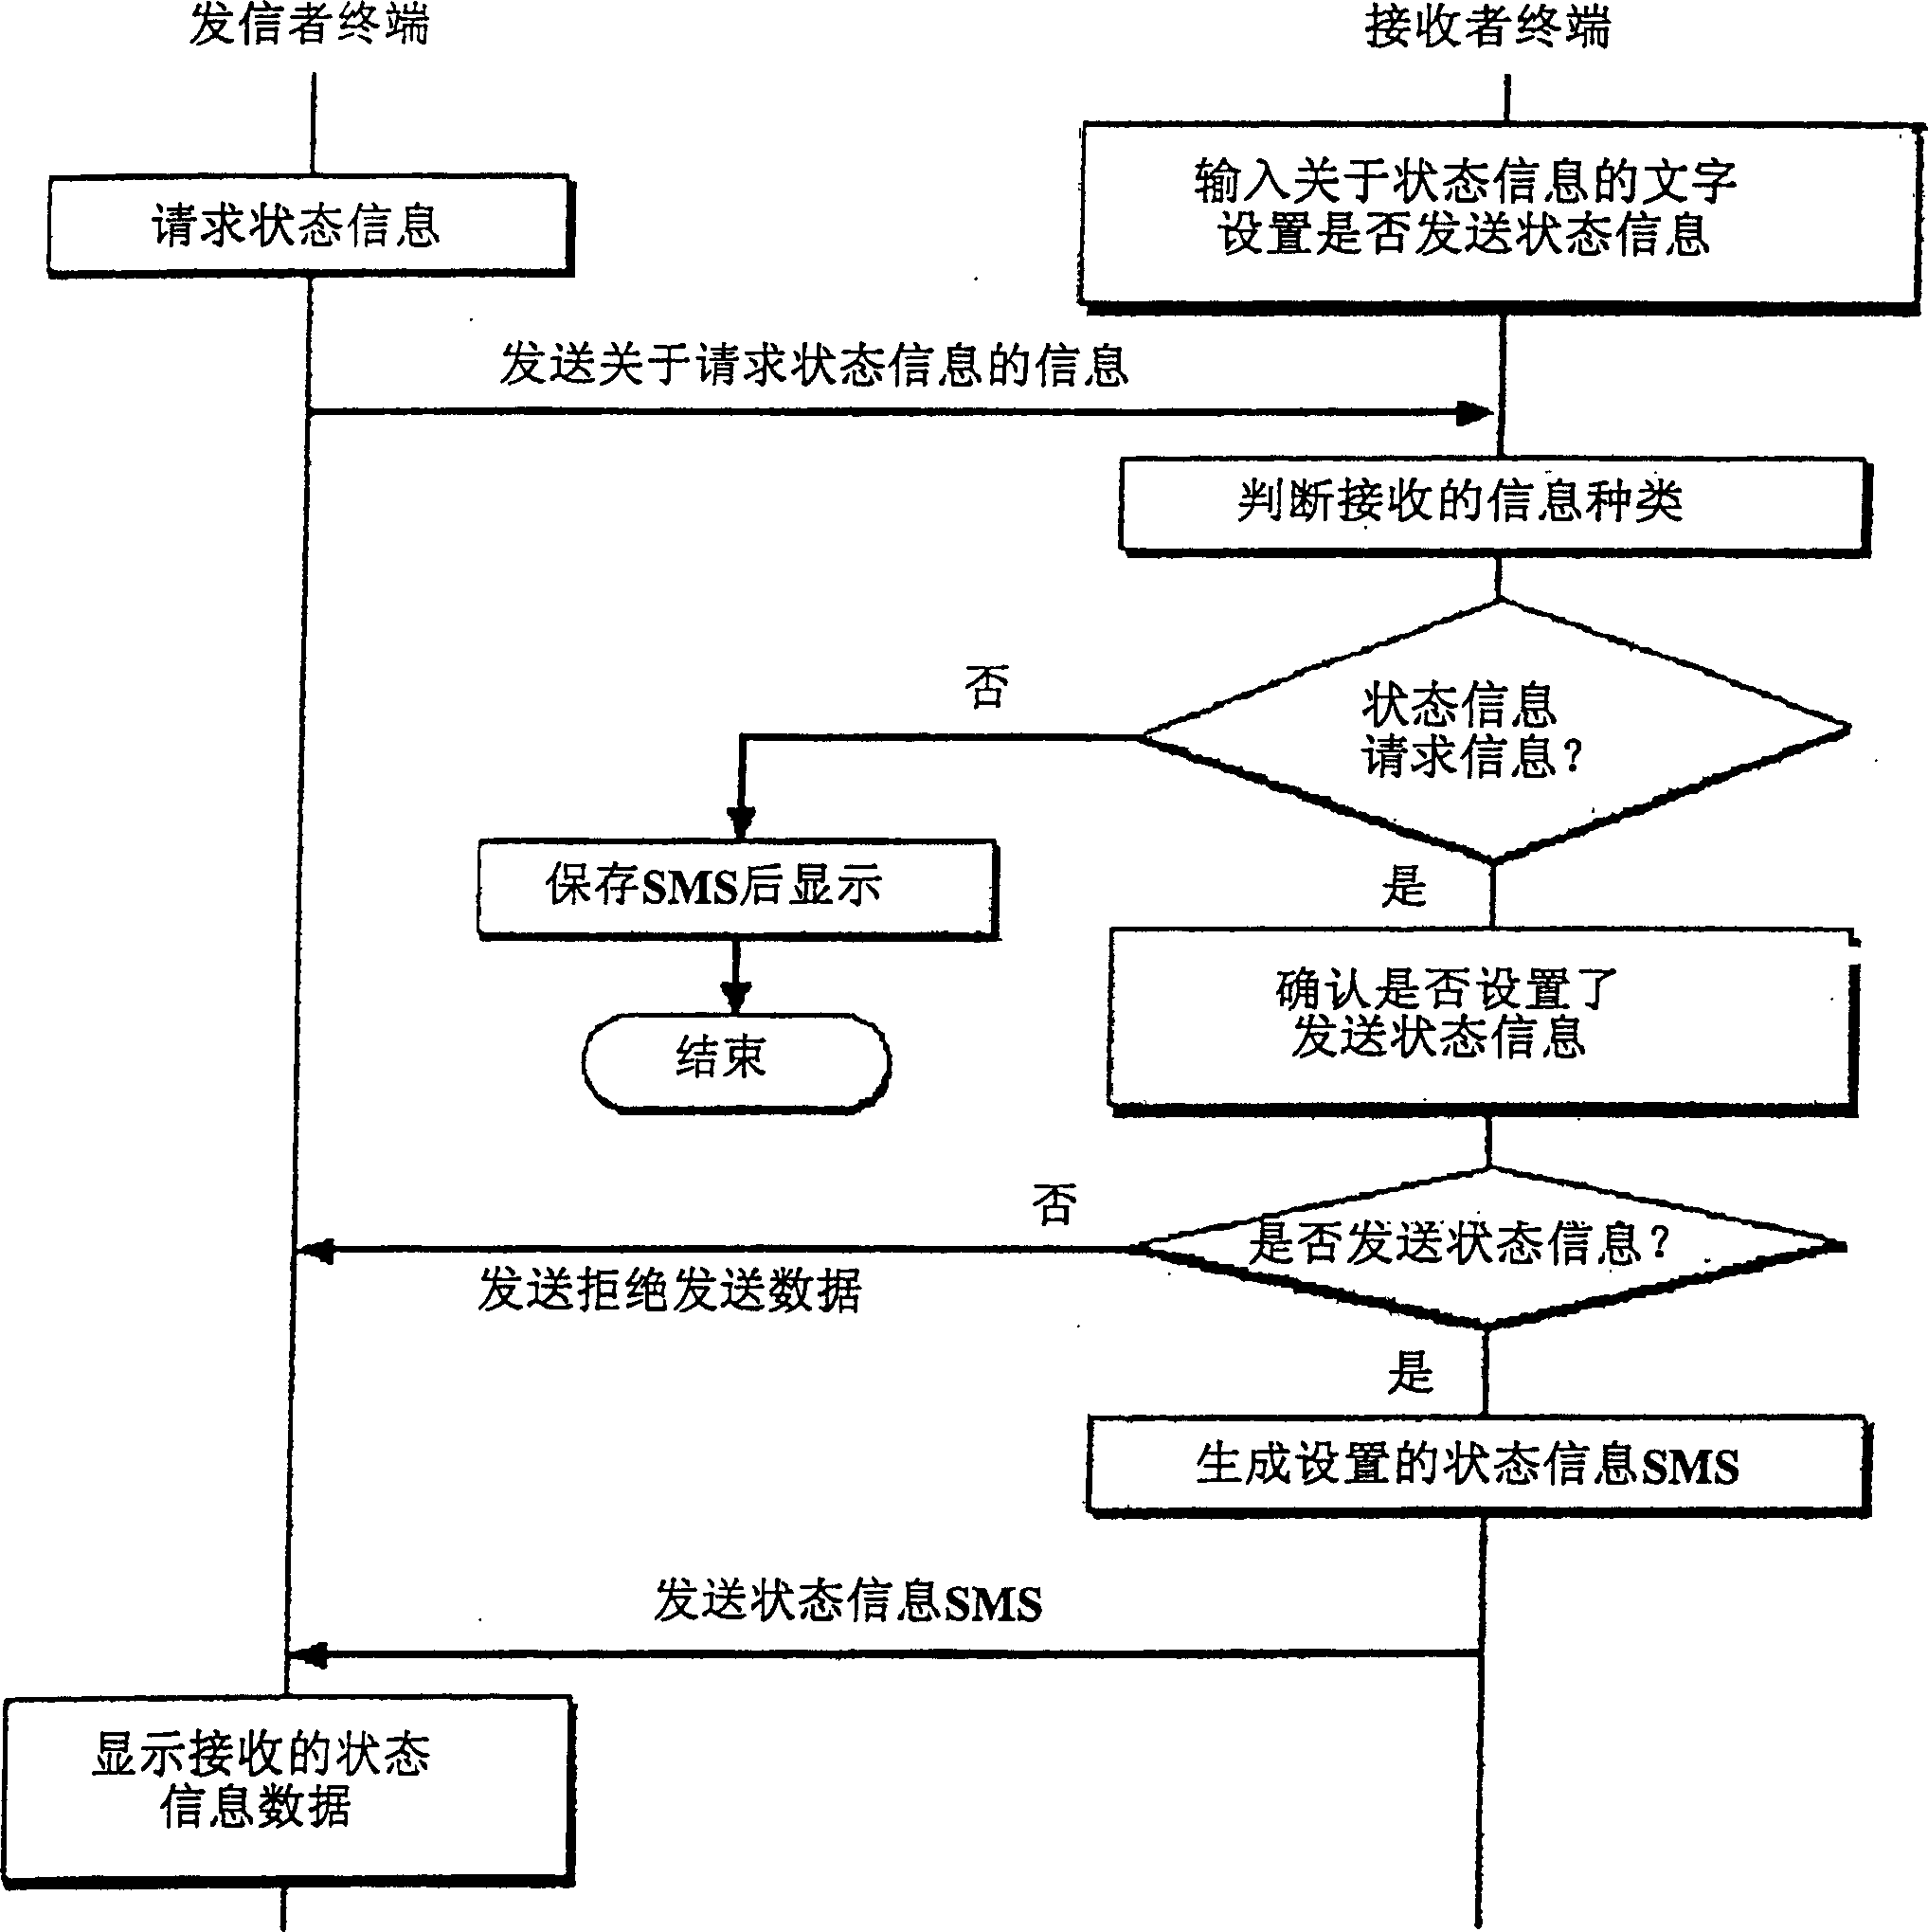 Method for confirming receiver state